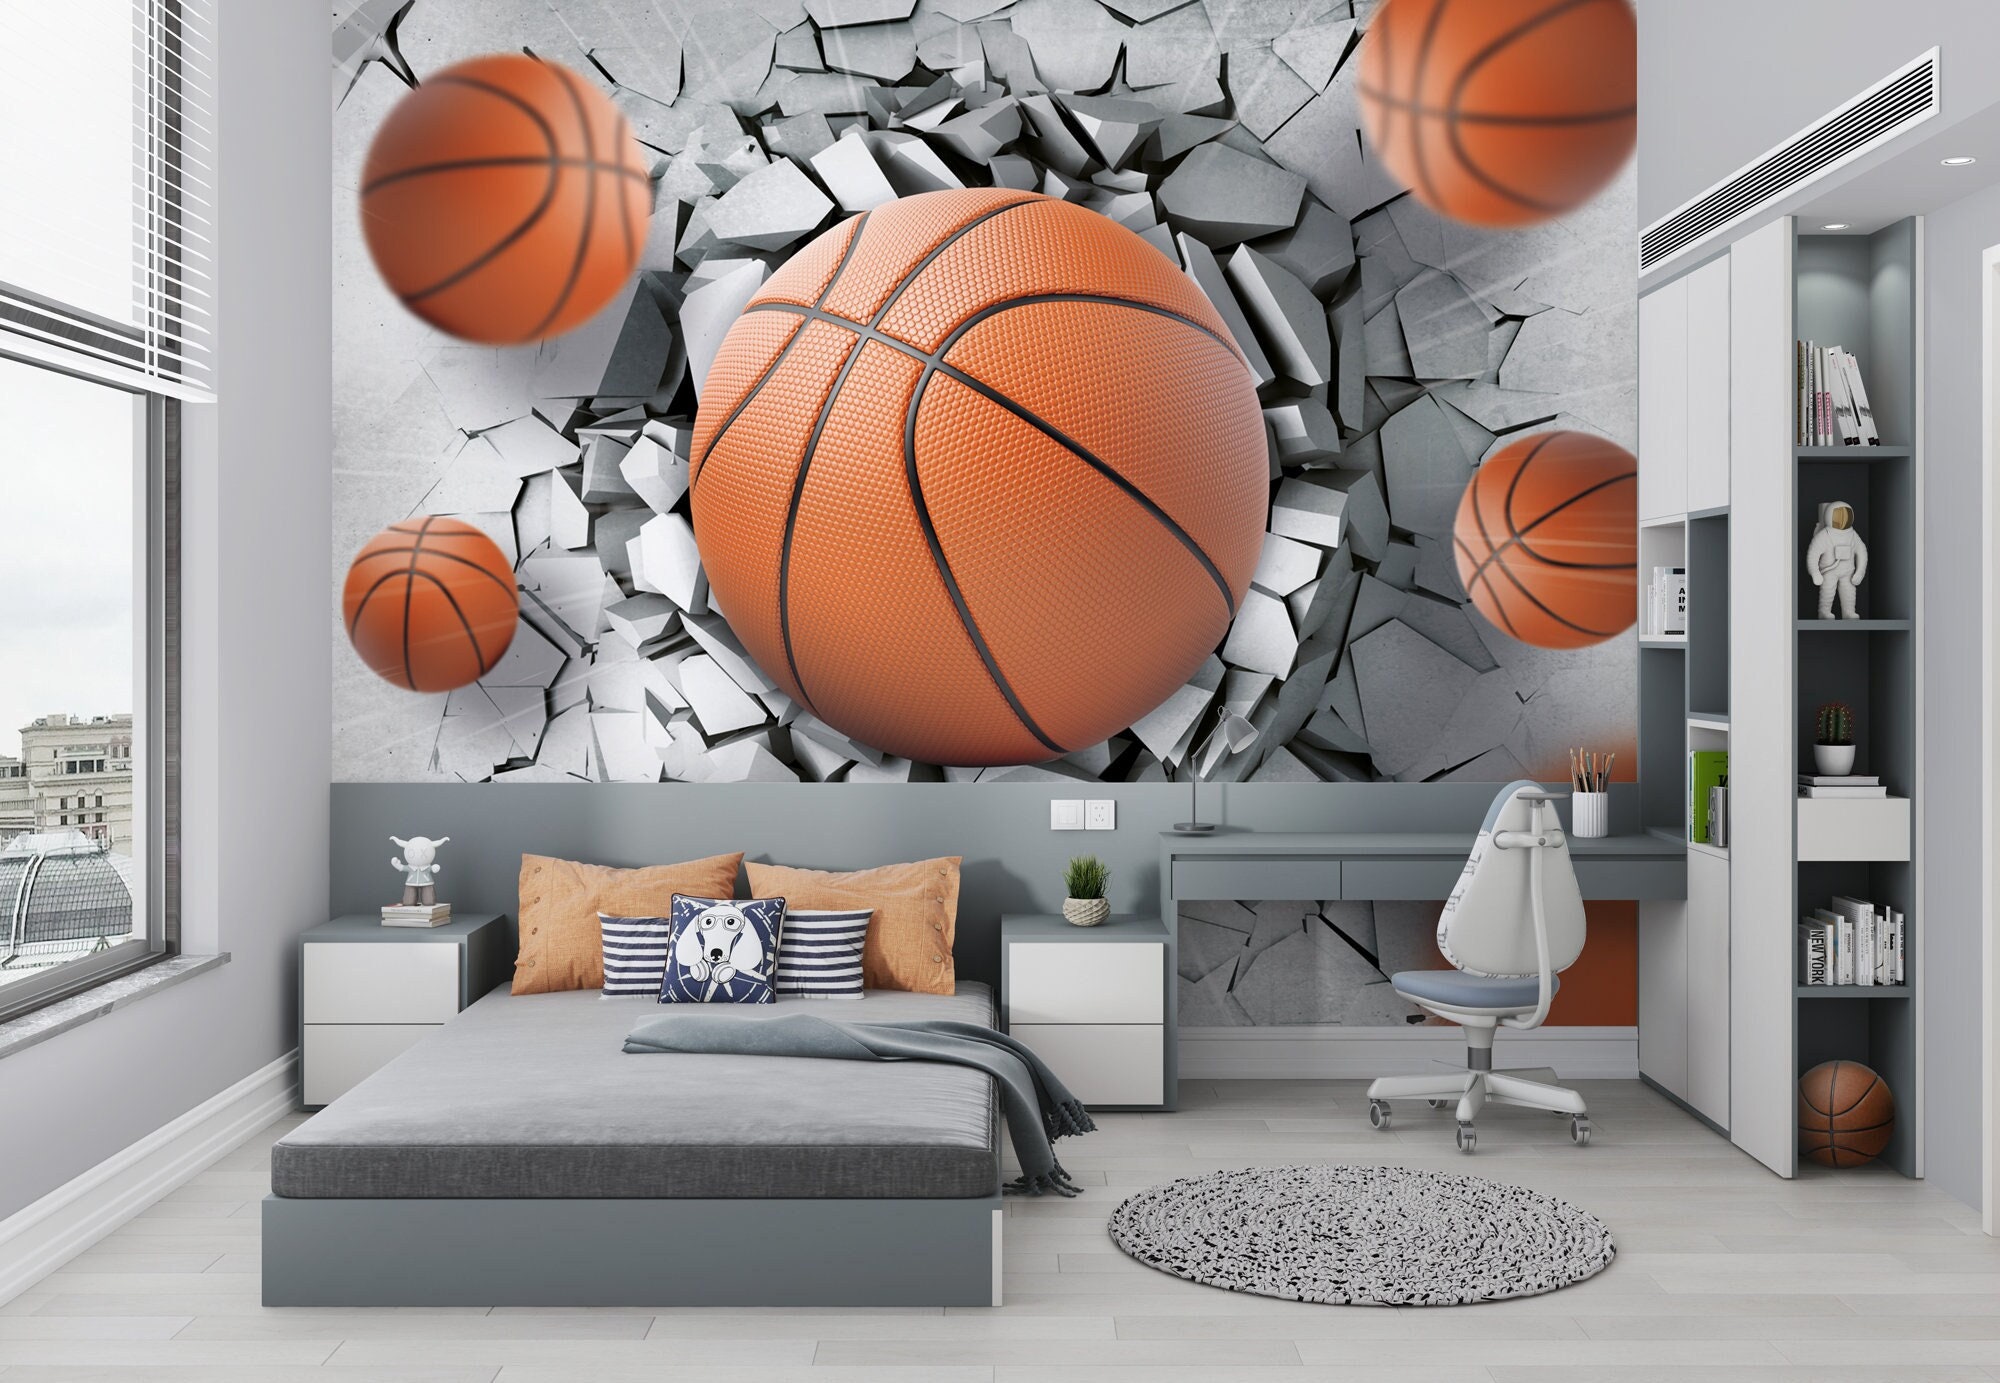 Charlotte Hornets: Miles Bridges 2021 - NBA Removable Adhesive Wall Decal Life-Size Athlete +13 Wall Decals 40W x 78H